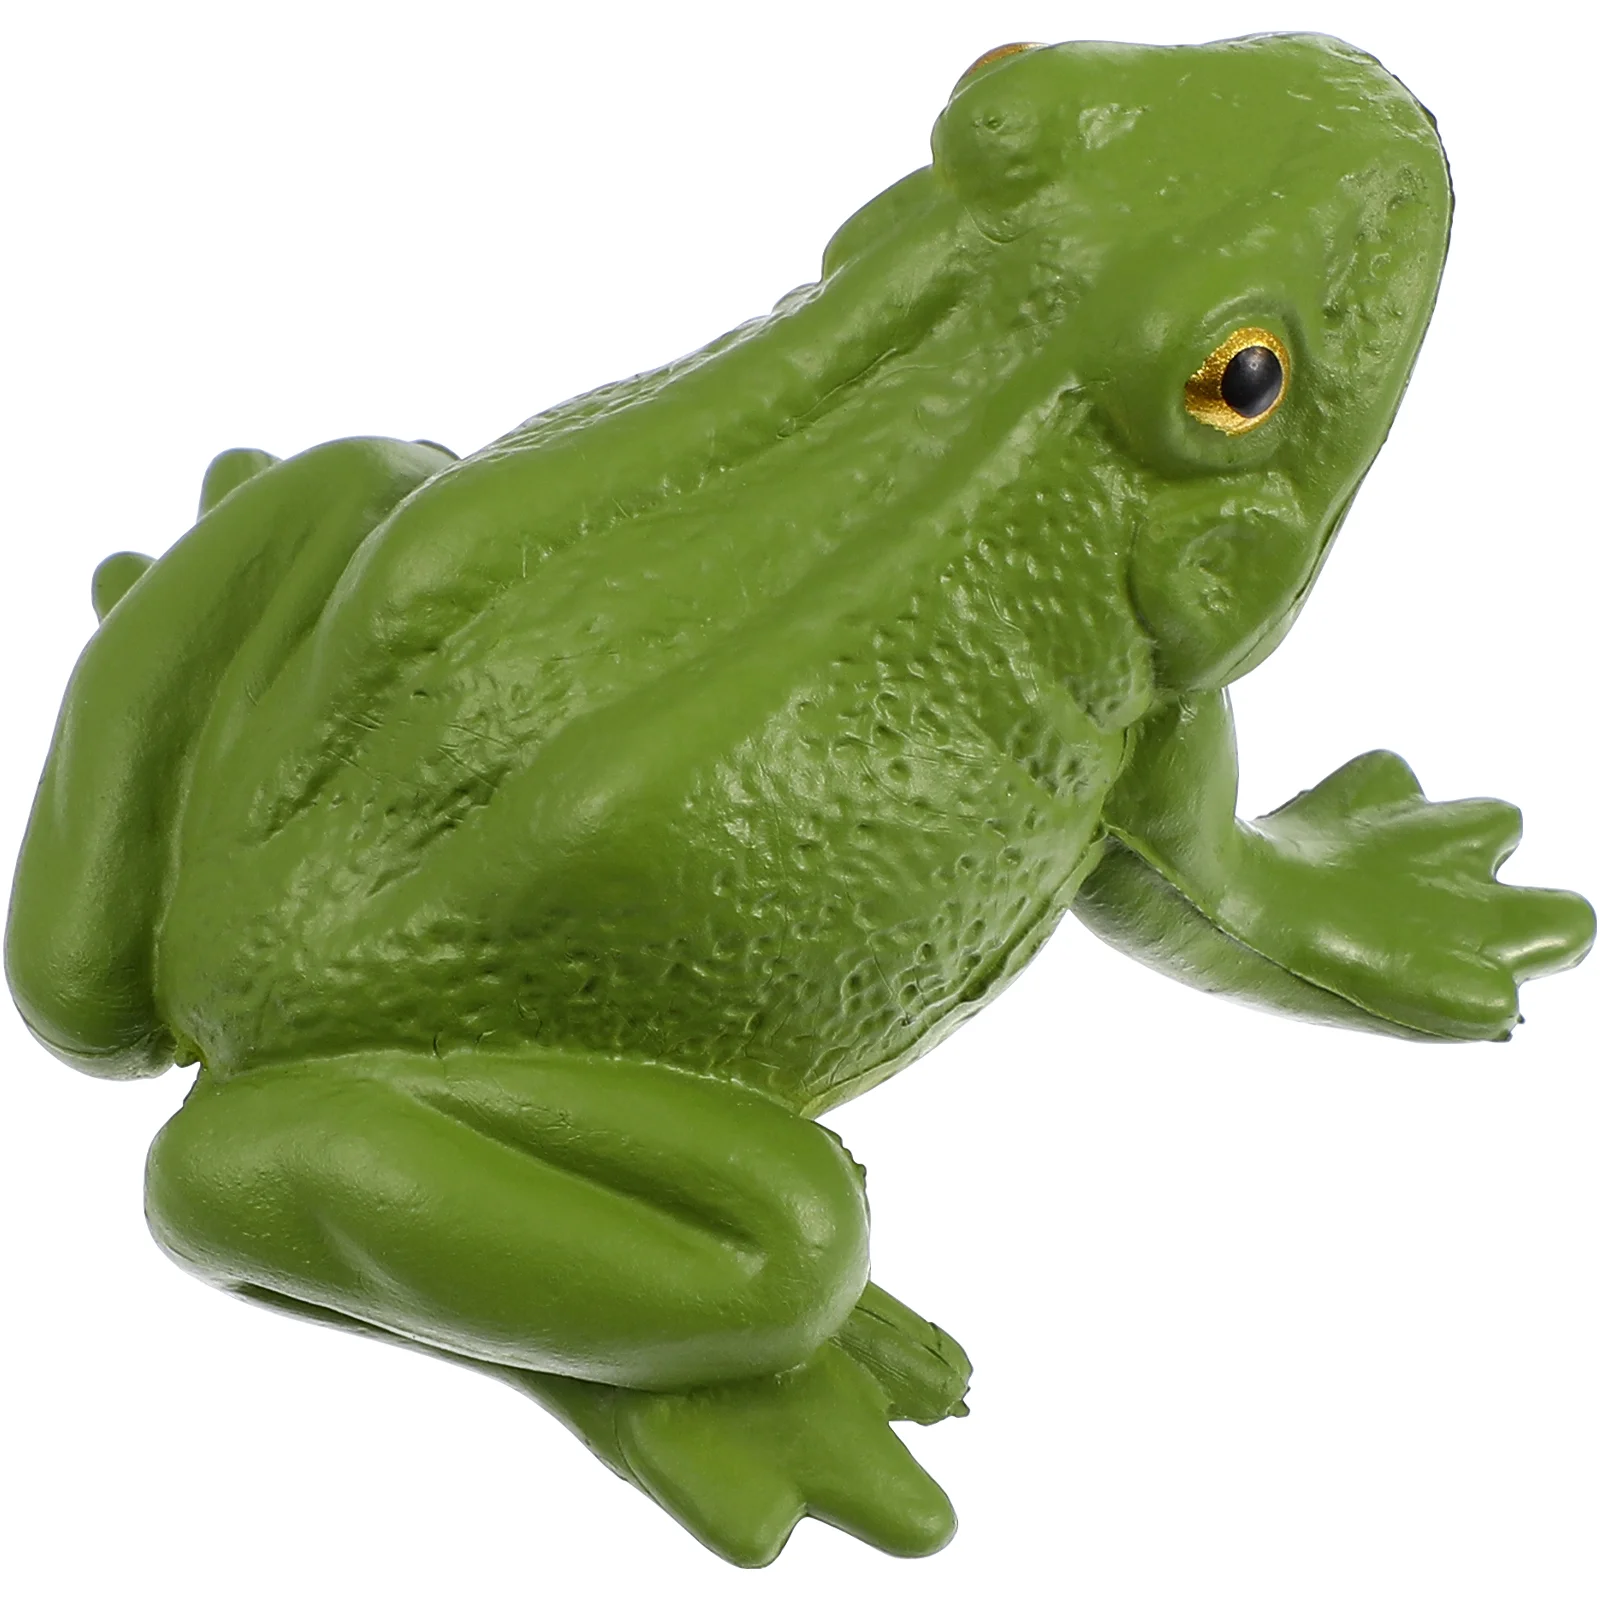 

Frog Figurine Realistic Animal Model Educational Teaching Prop Kid Toy Plaything Ornament